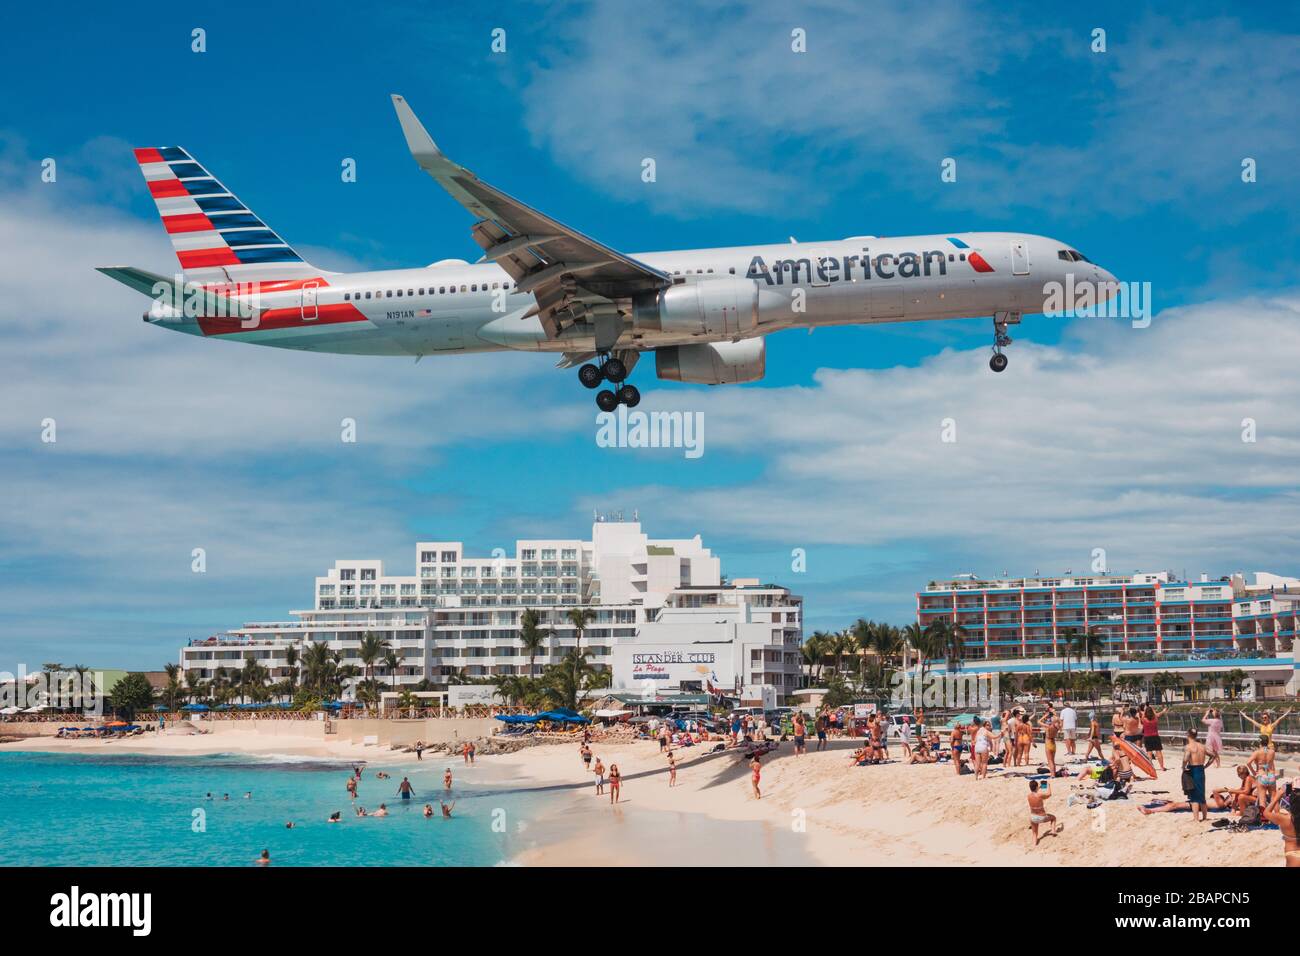 An American Airlines Boeing 757 flies over tourists sunbathing and swimming on Maho Beach, St. Maarten Stock Photo